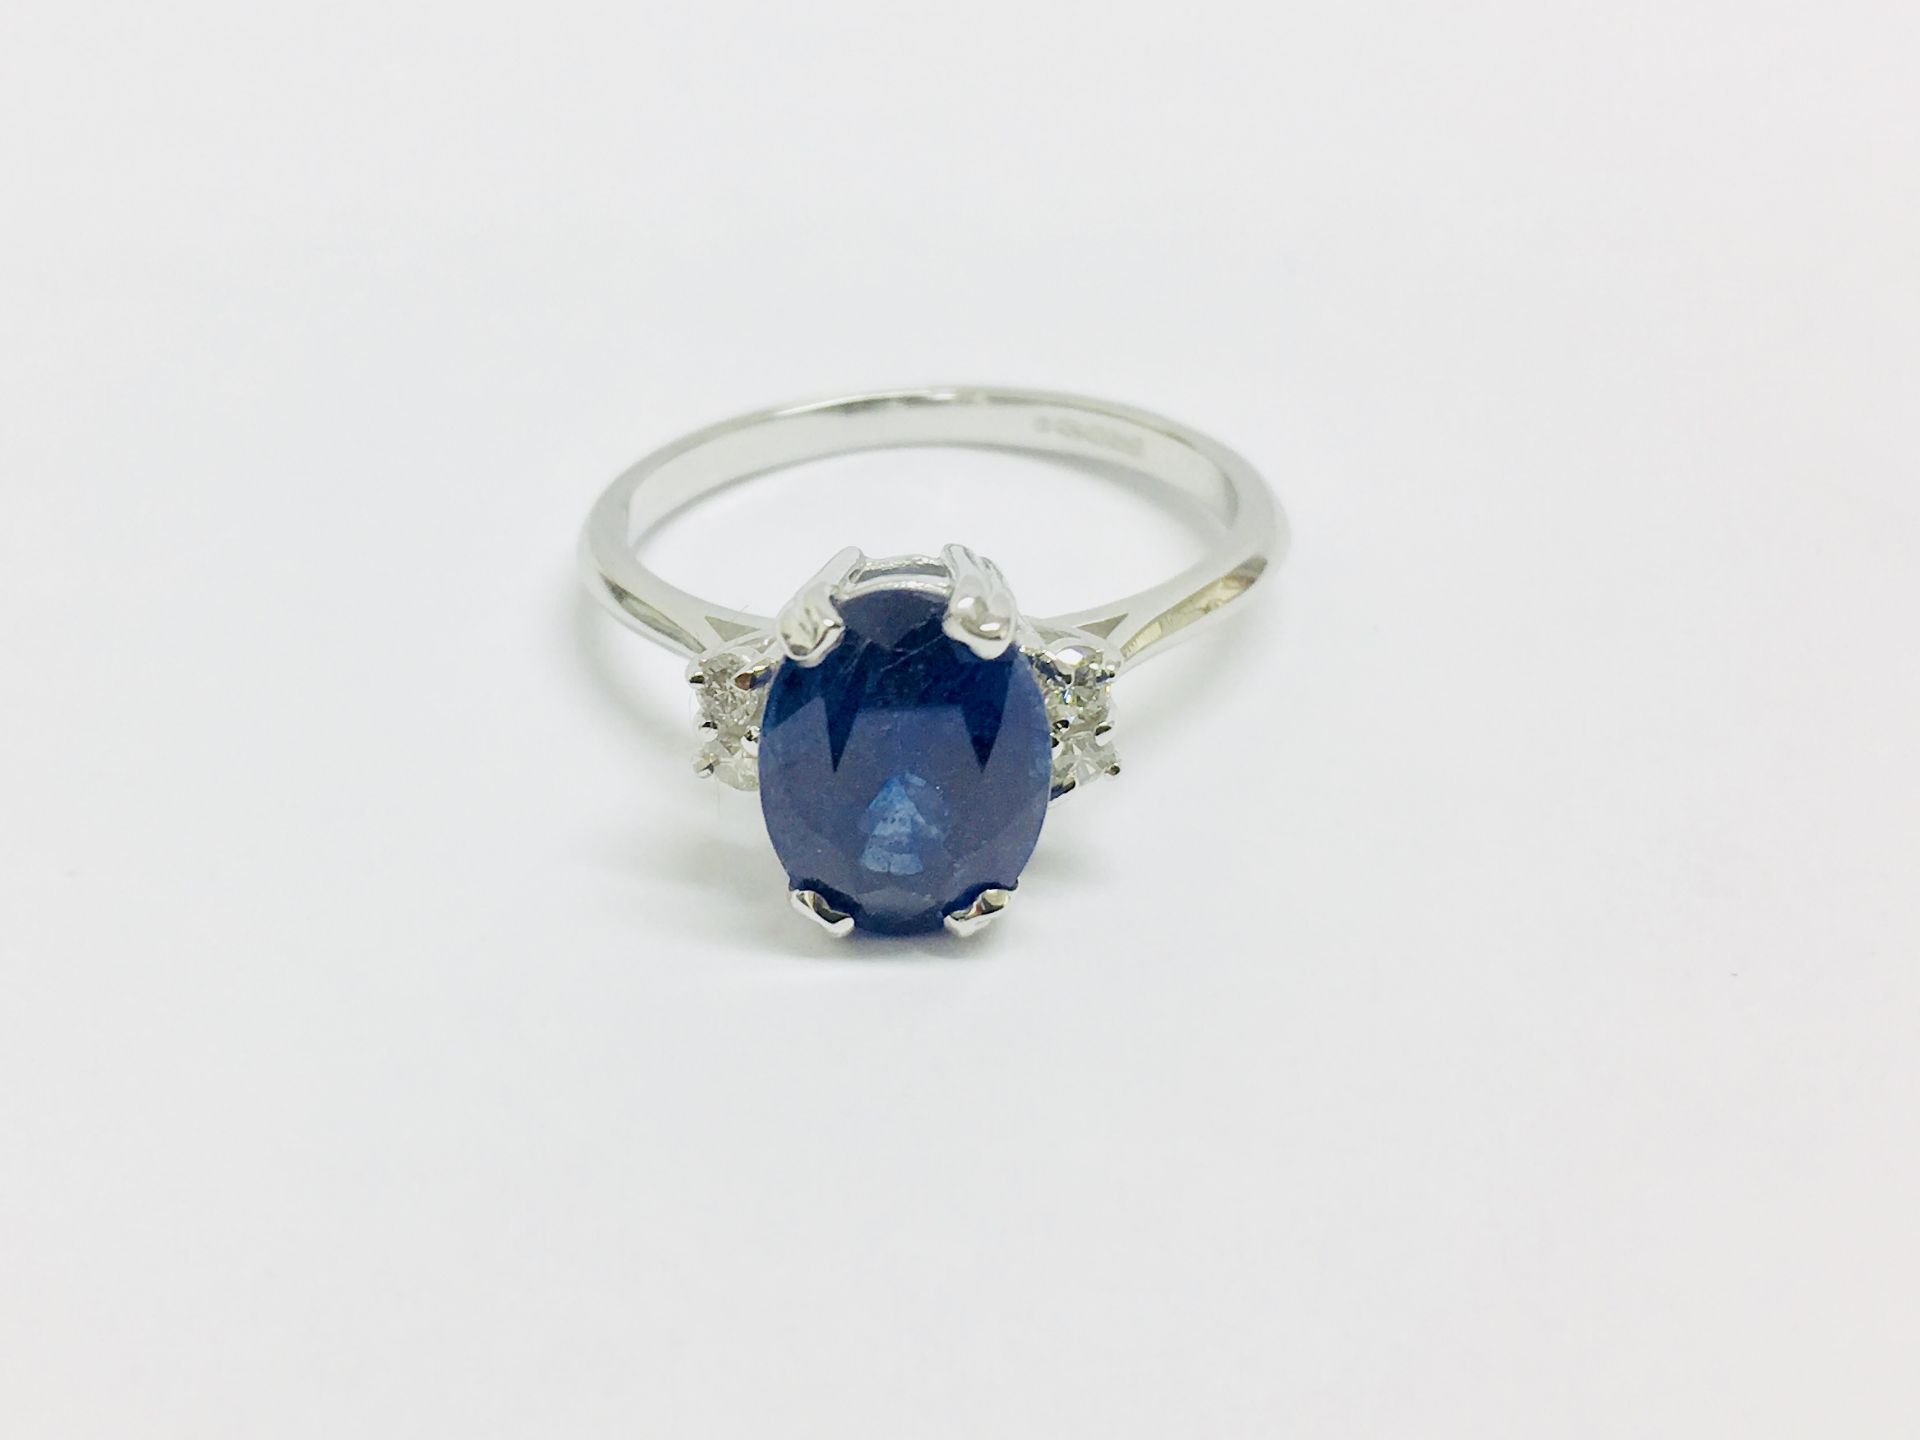 2.40Ct Sapphire And Diamond Ring. - Image 2 of 3